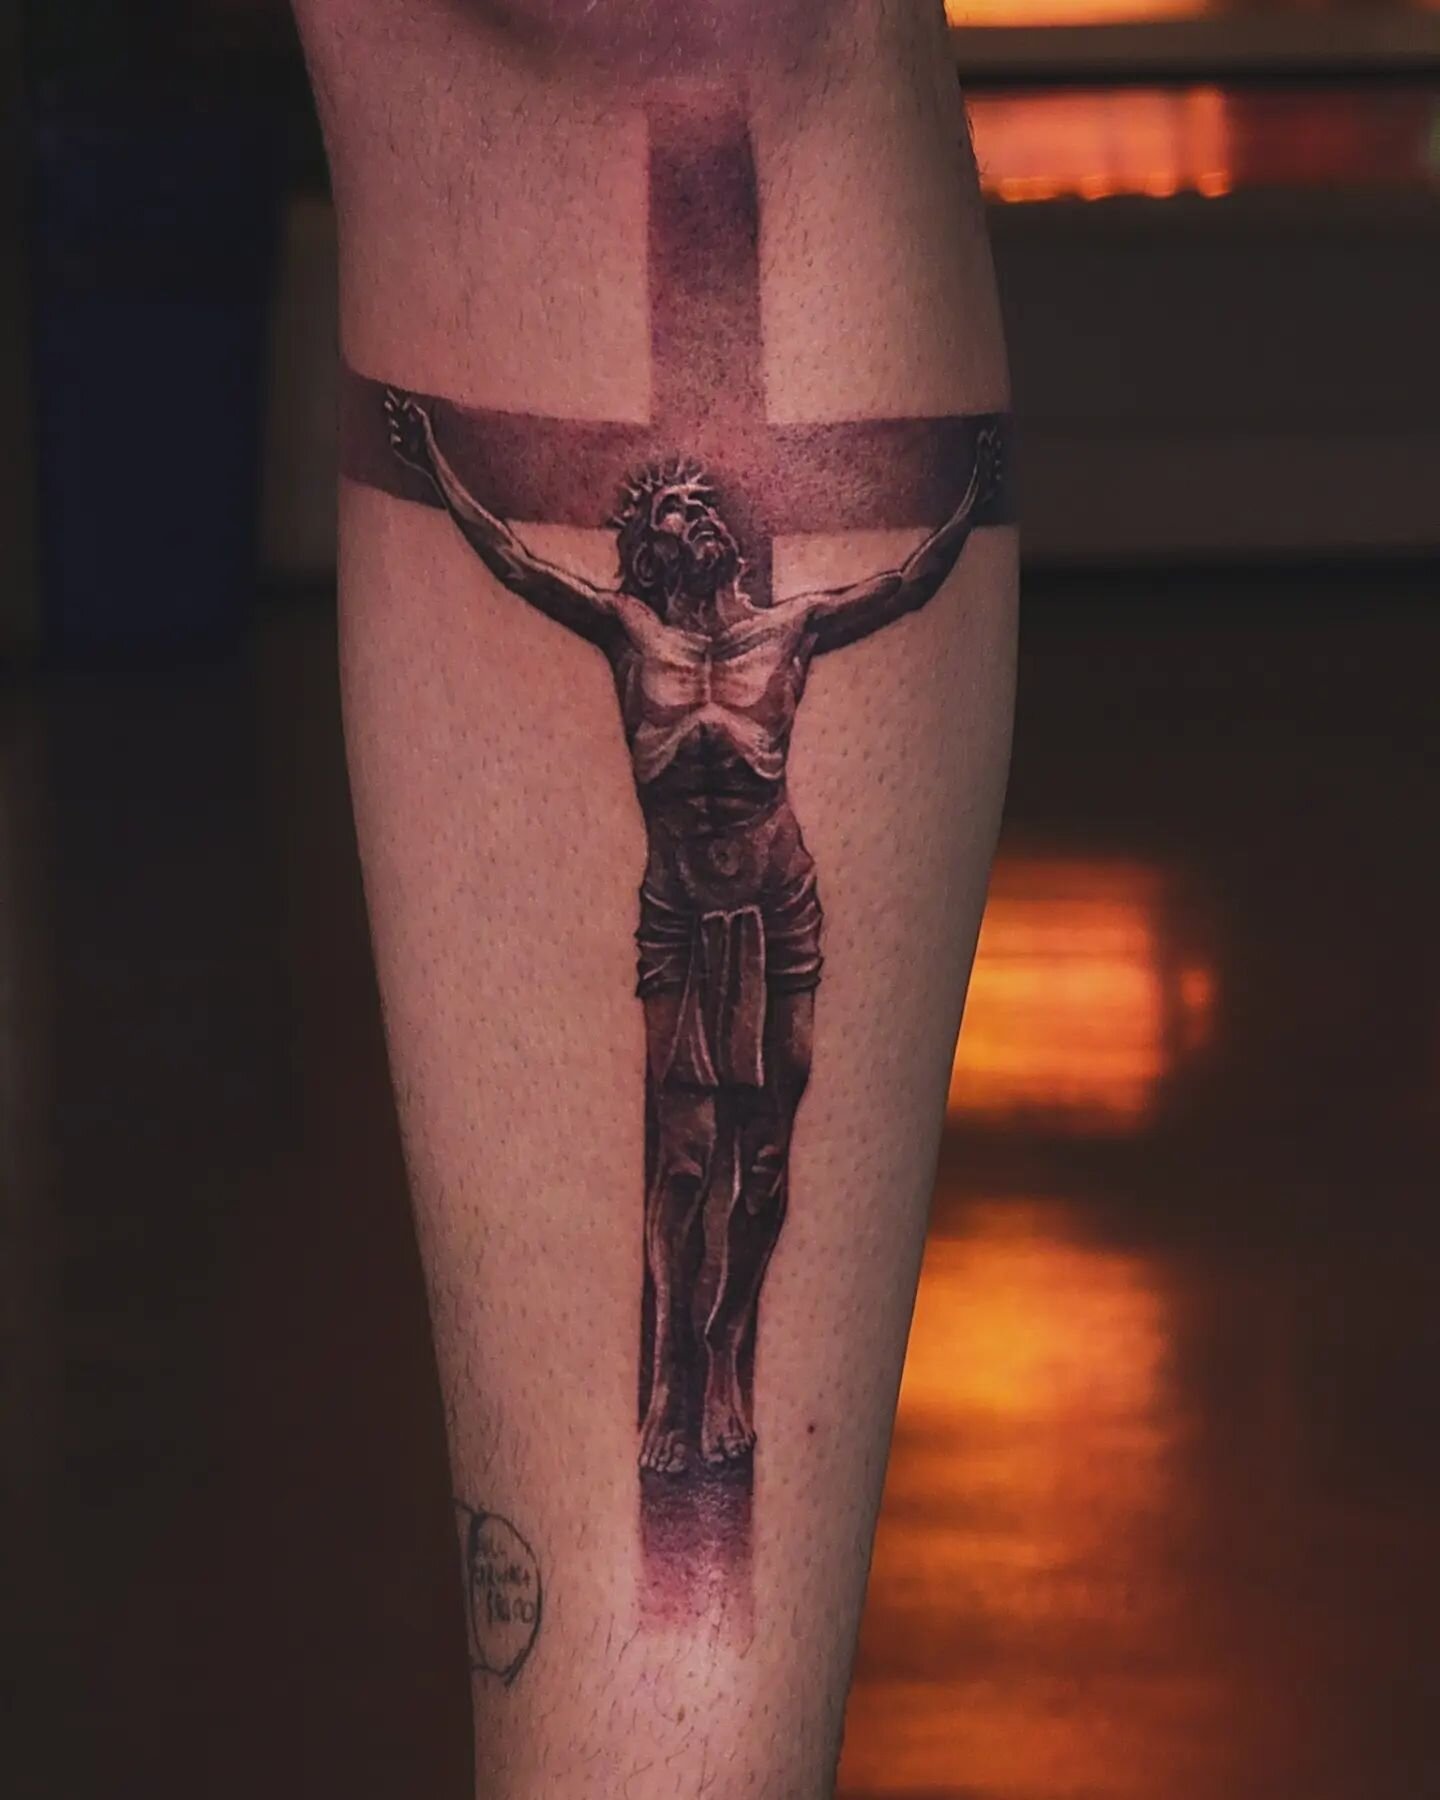 Even Jesus can't forgive you for shitting in your man's bed bruh. Amber heard going to hell for this one.
.
.
#religioustattoo #jesustattoo #portraittattoo #microrealism #microportrait #classictattoo #bngtattoo #blackandgreytattoo #blackandgraytattoo